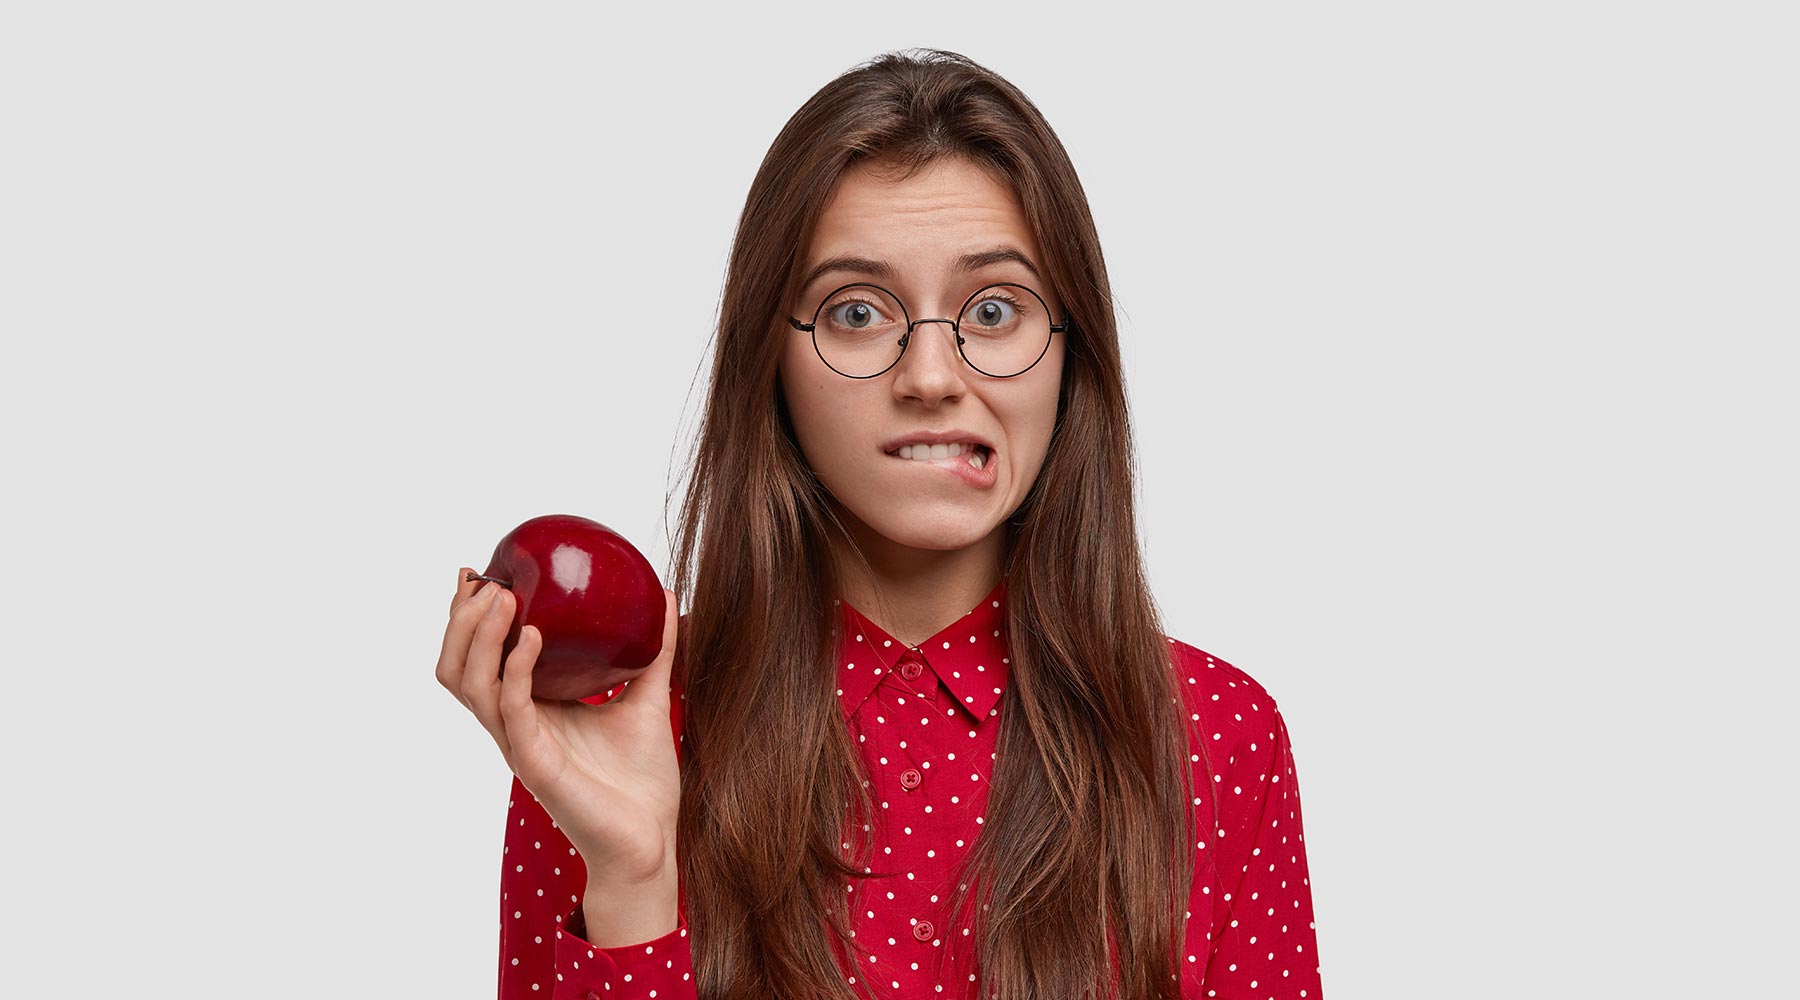 Are apples bad for my teeth?